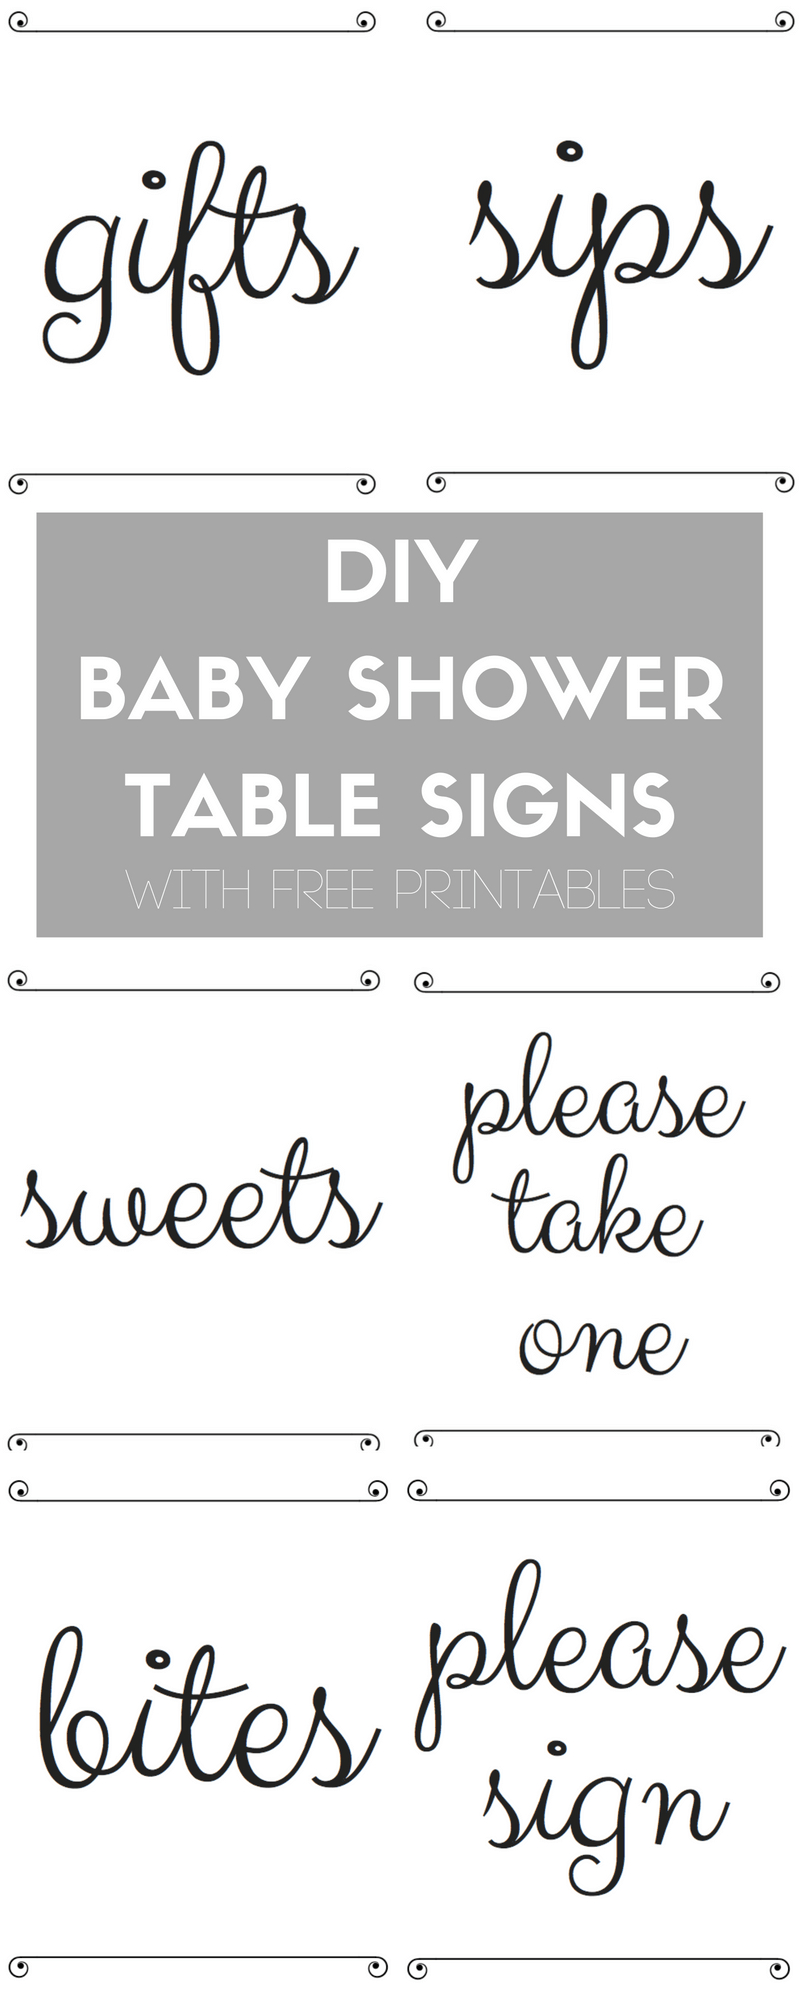 Diy Baby Shower Table Signs With Free Printables | Best Of The Blog - Free Printable Baby Shower Table Signs